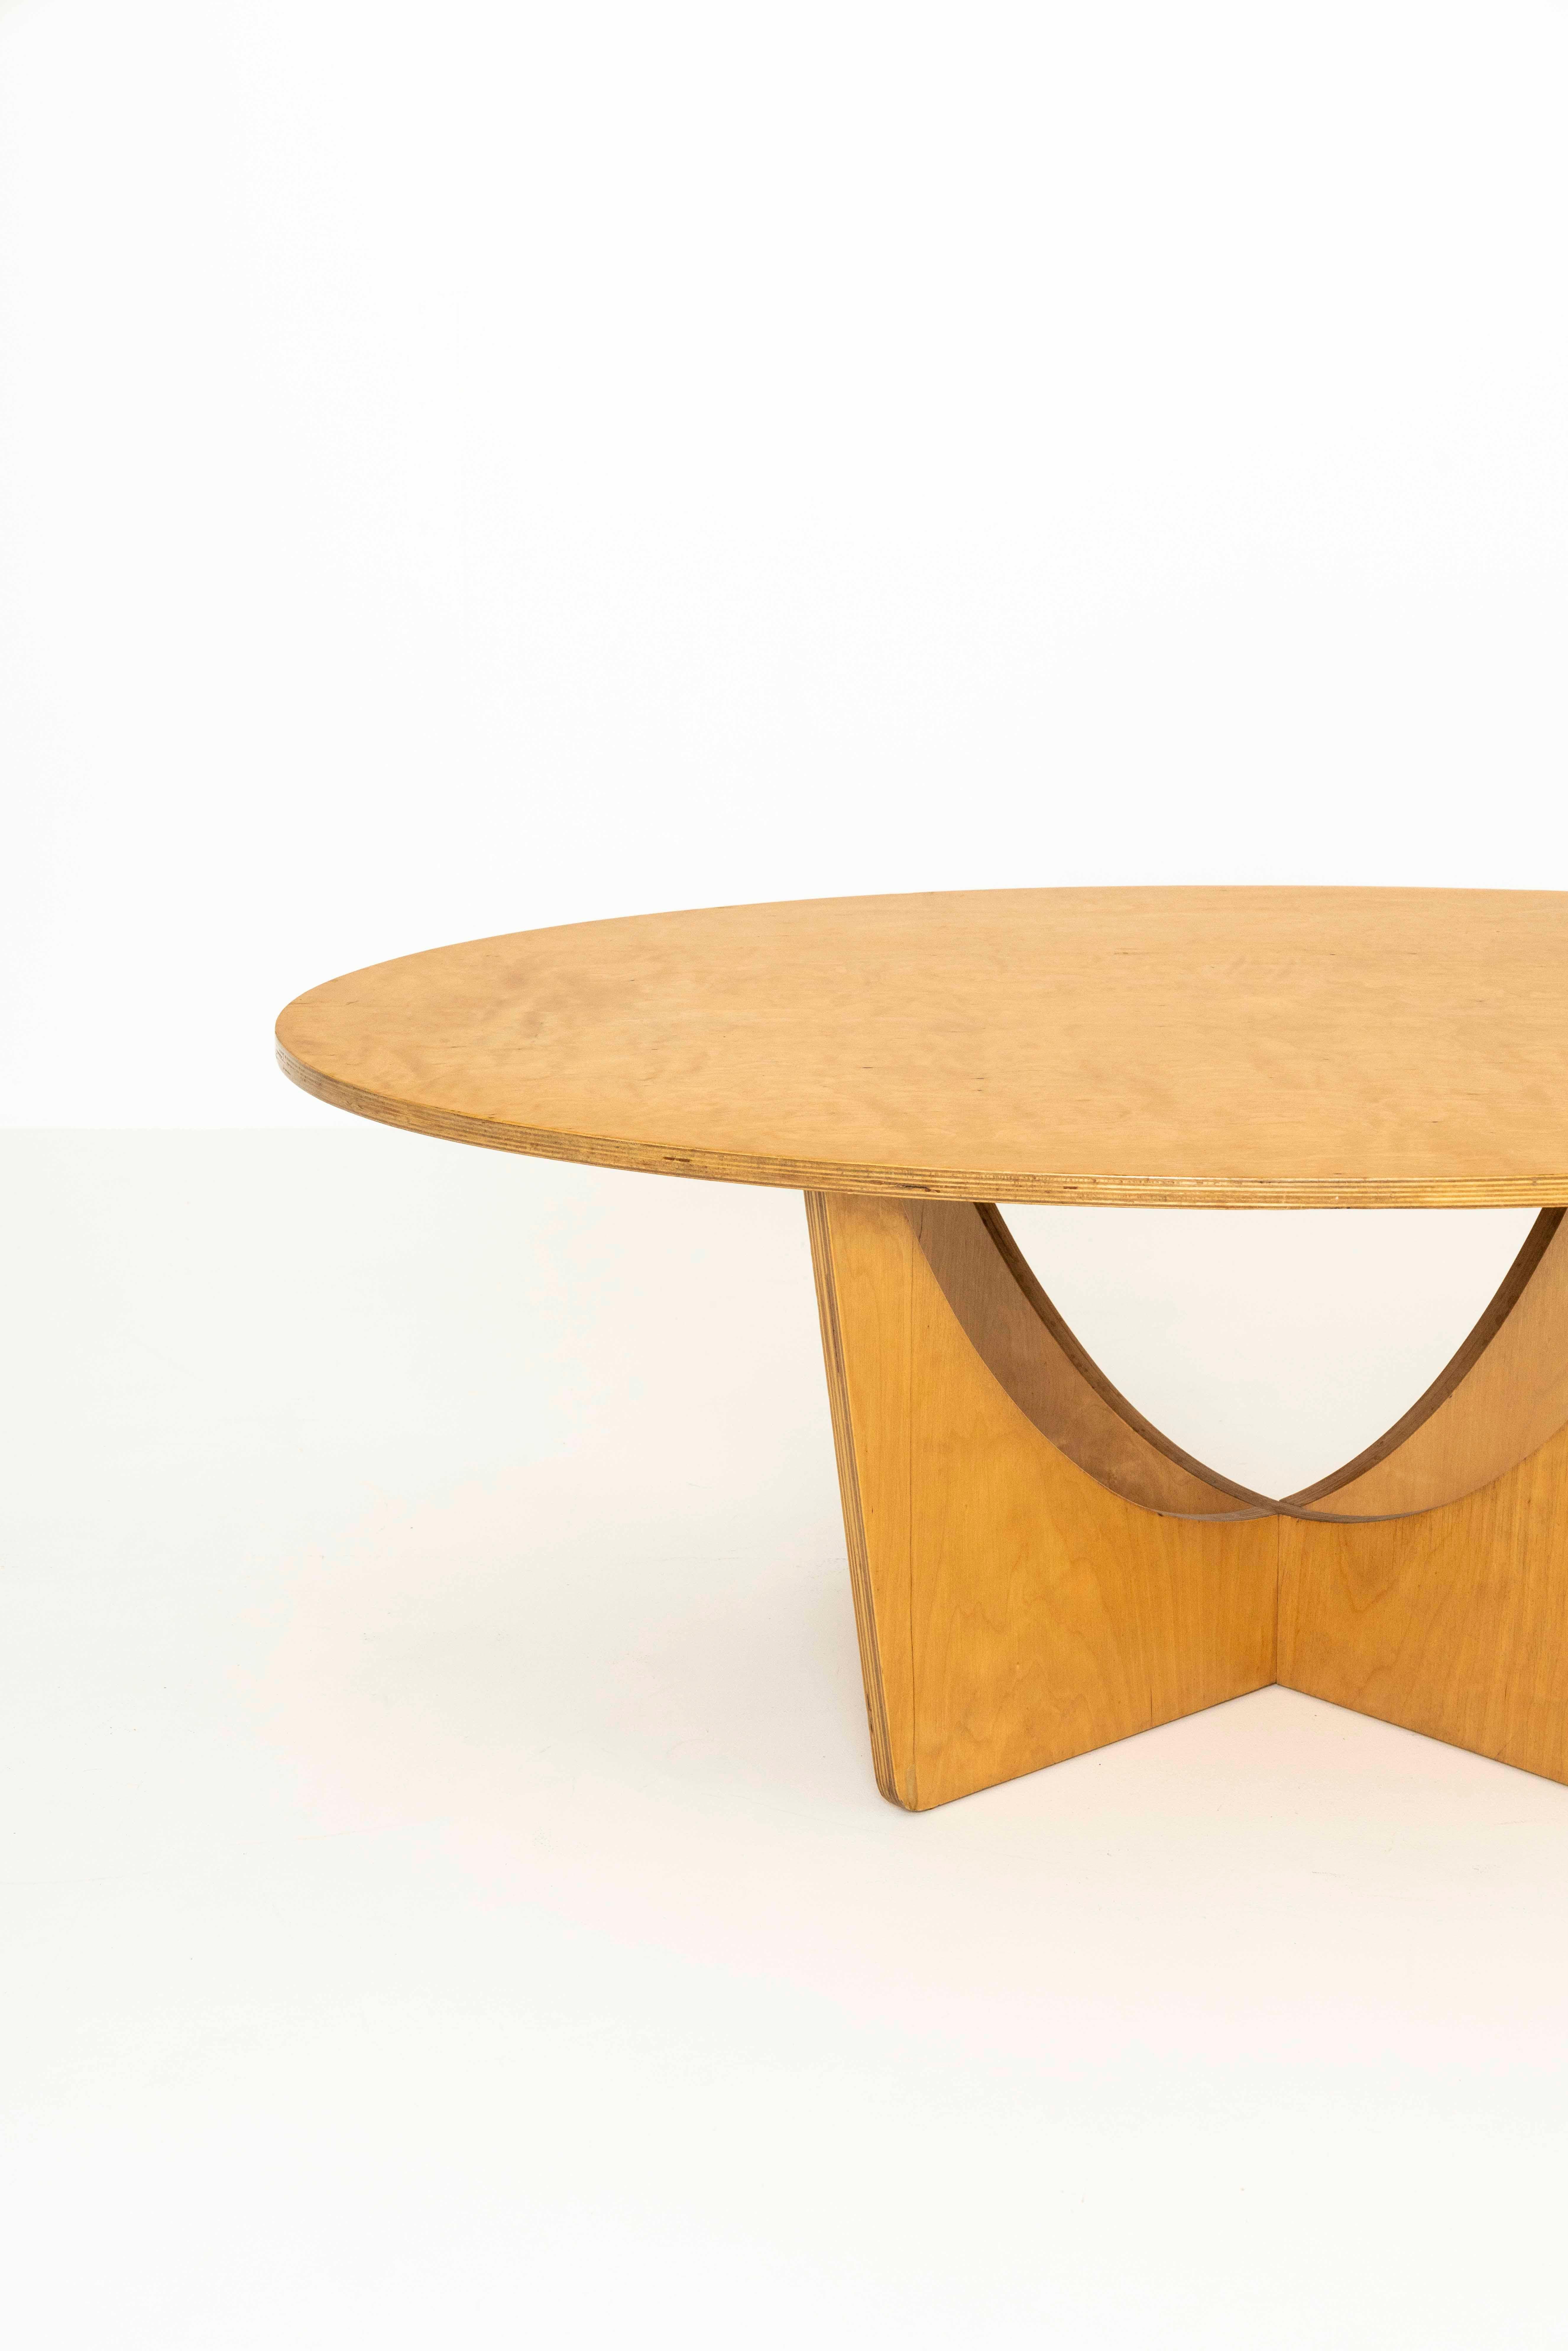 Mid-Century Modern Vintage Coffee Table in The Style of Gerald Summers, 1950s